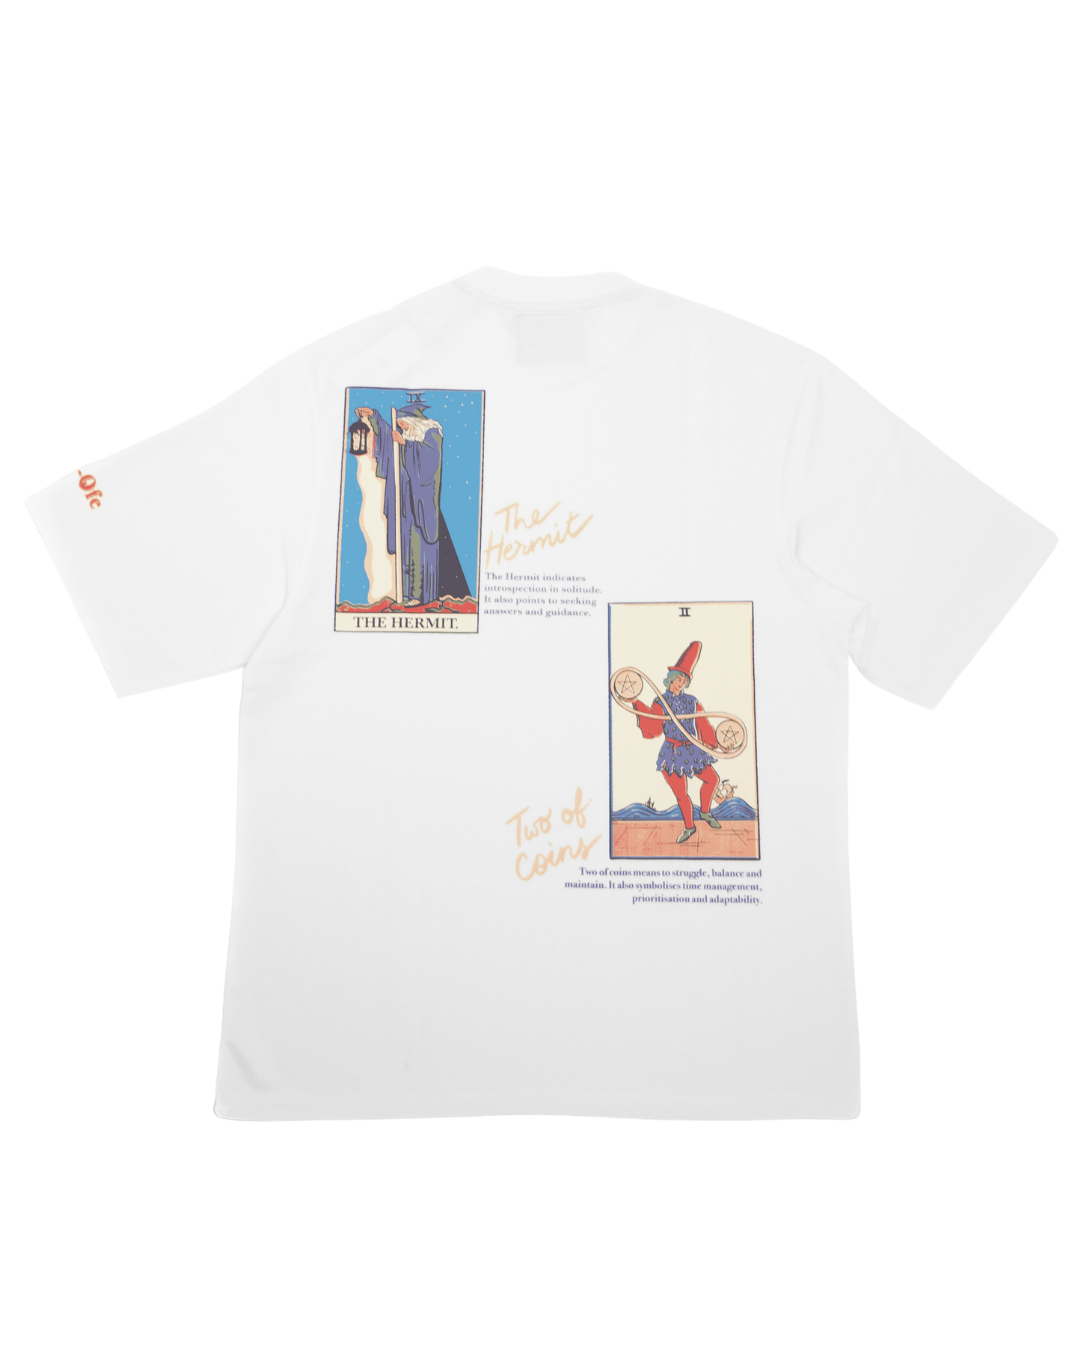 Ore Ofe White T-shirt back view with two tarot cards